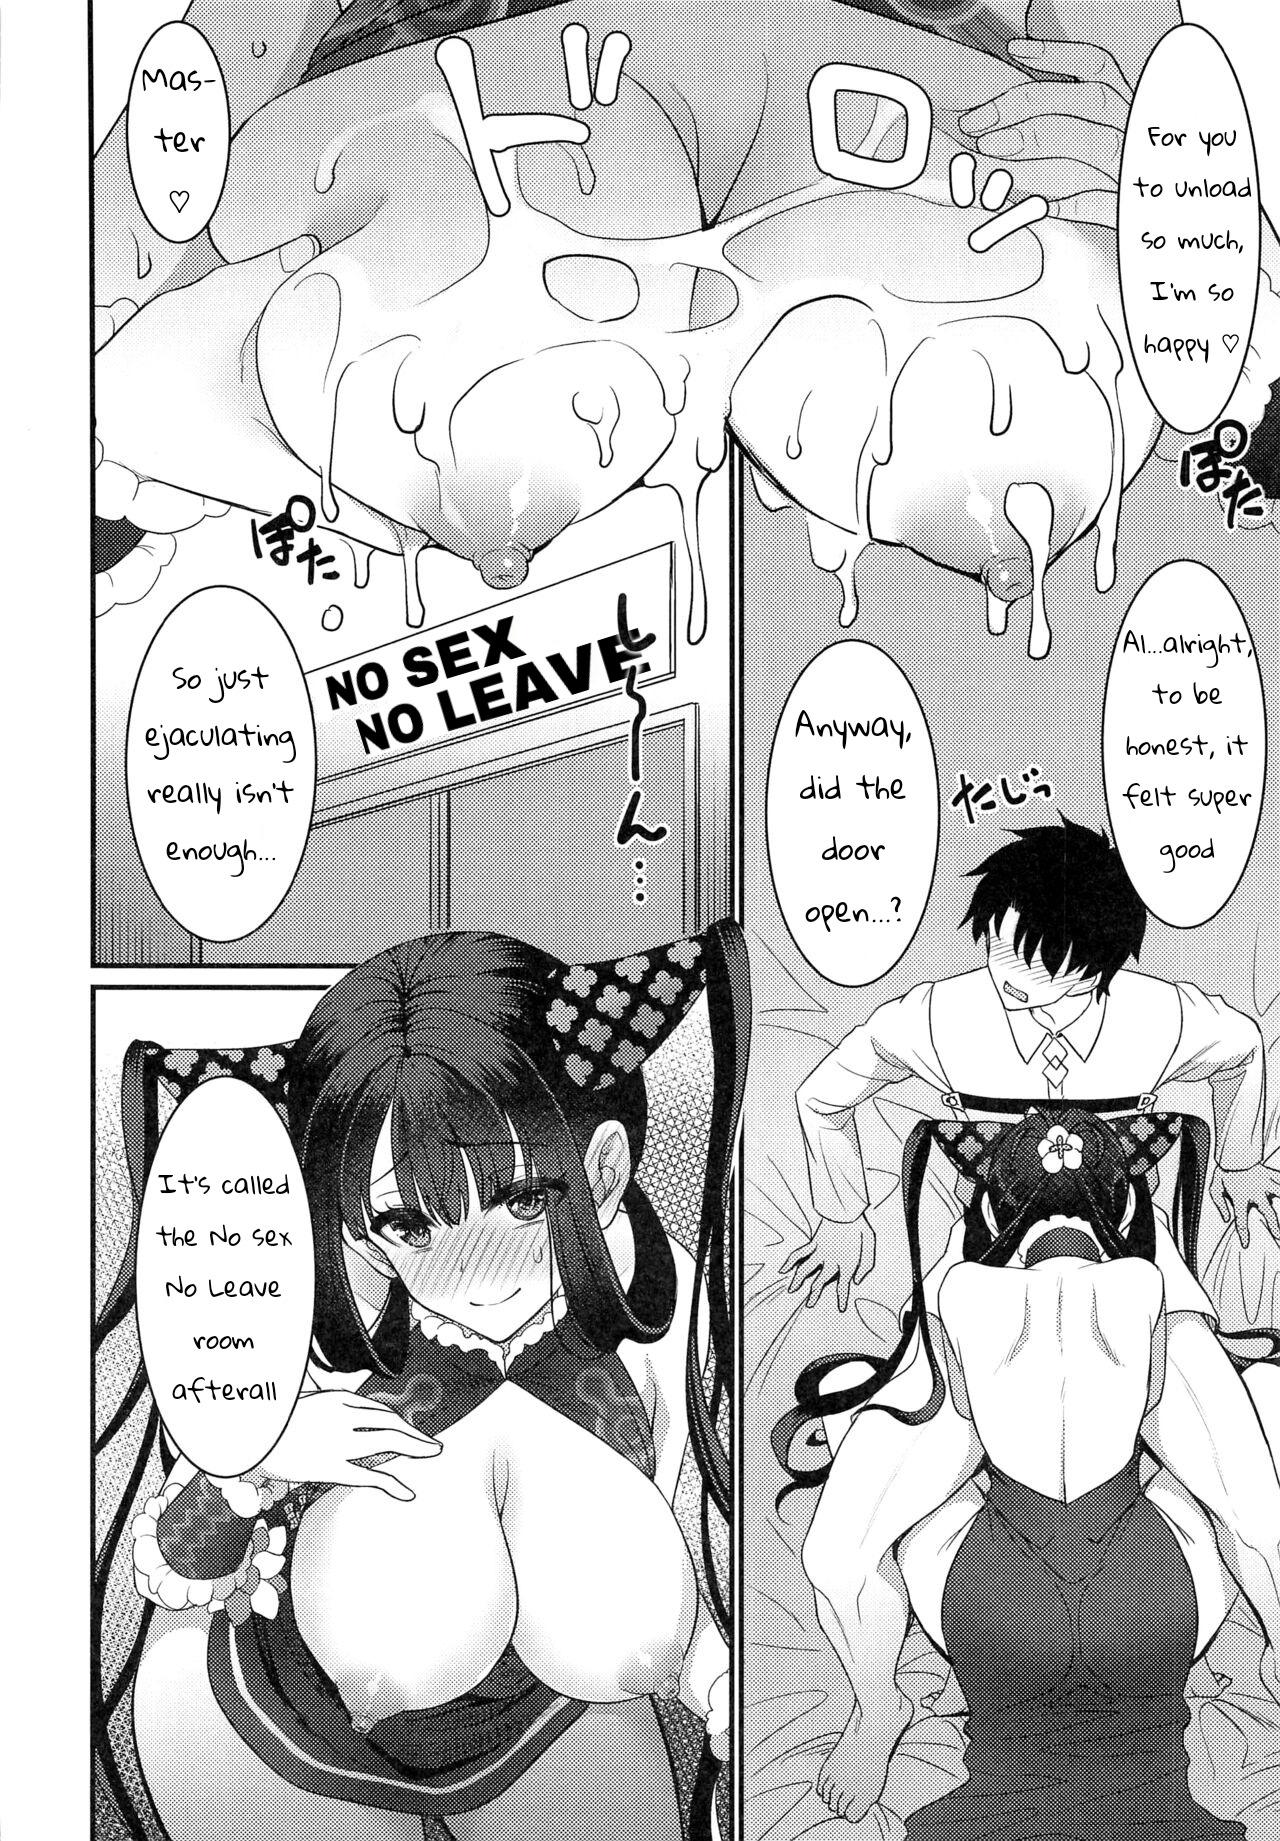 Body Rei no Heya de SEX Shita noni Derarenai Ken | We had SEX in the room but we still can't get out - Fate grand order Hot Girl Pussy - Page 7